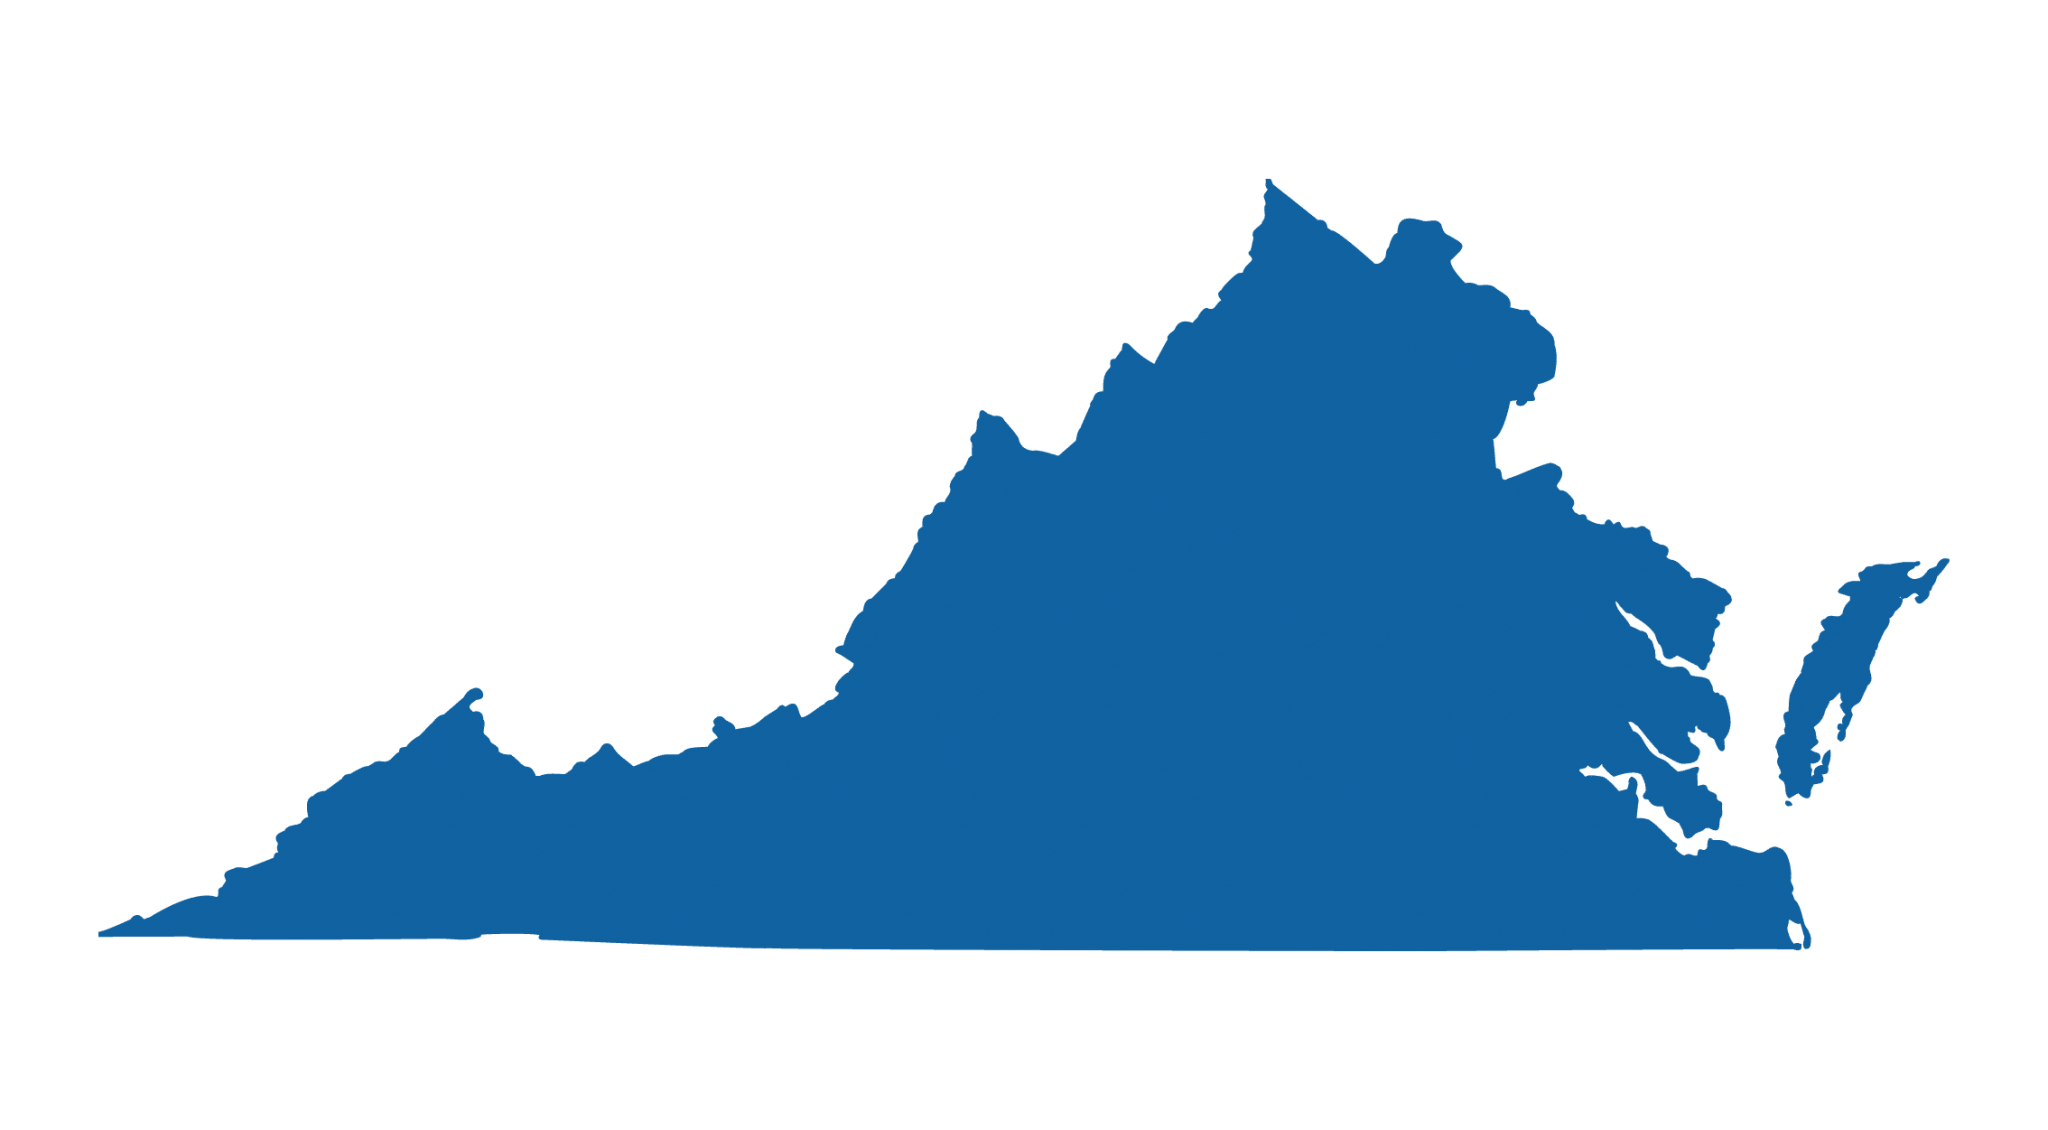 Outline of the state of Virginia colored blue